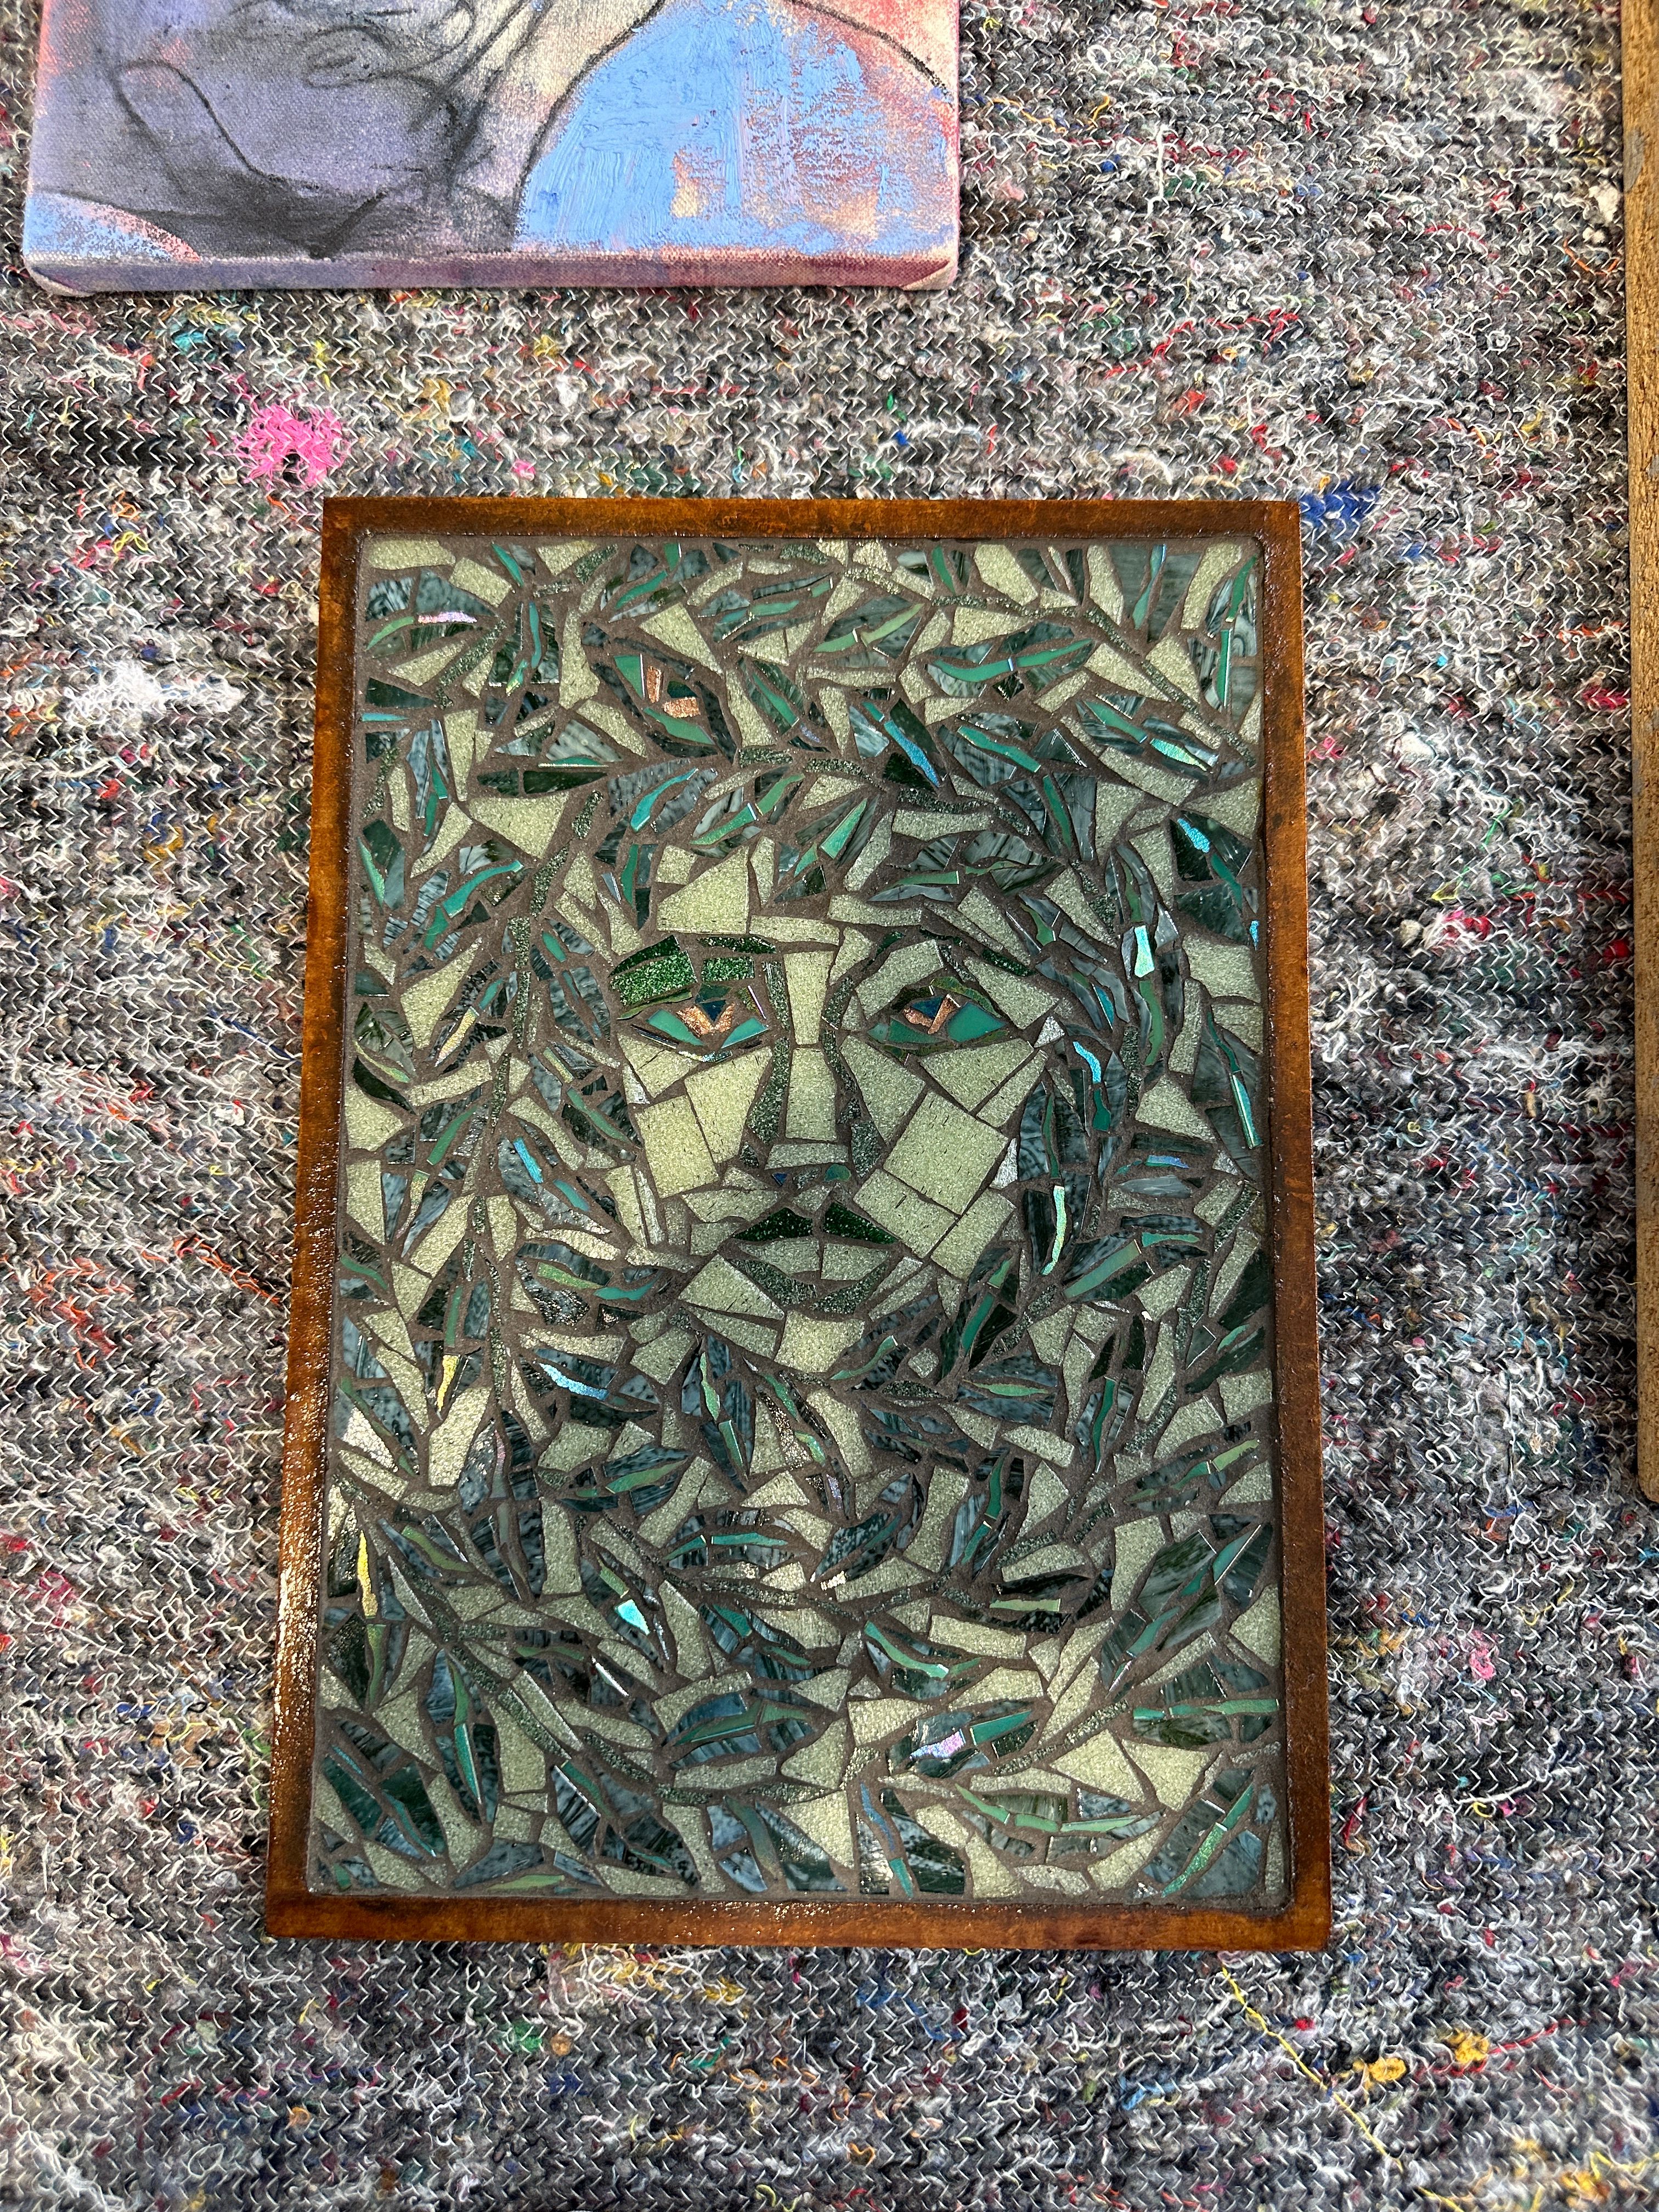 A mosaic by Alexi Marshall